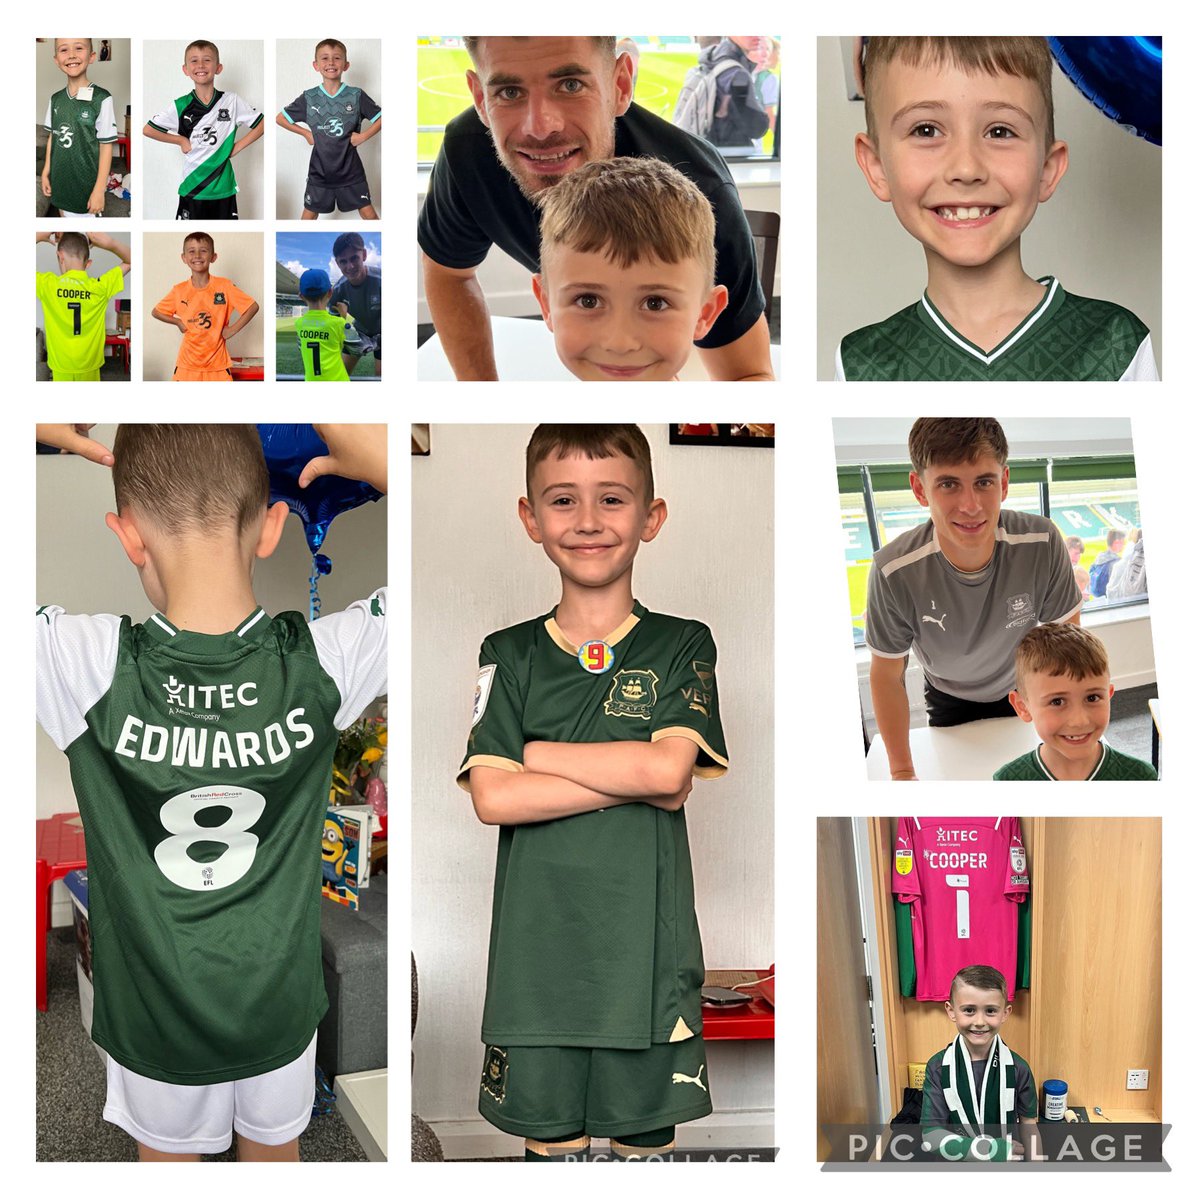 Happy 9th birthday Stanley, where has the time gone. You drive me insane most days but u have a heart of gold and are so loving. ⚽️🎉💚 Plymouth Argyle Football Club runs through your veins and u drive me crazy talking 247 about them! Have a fab day.